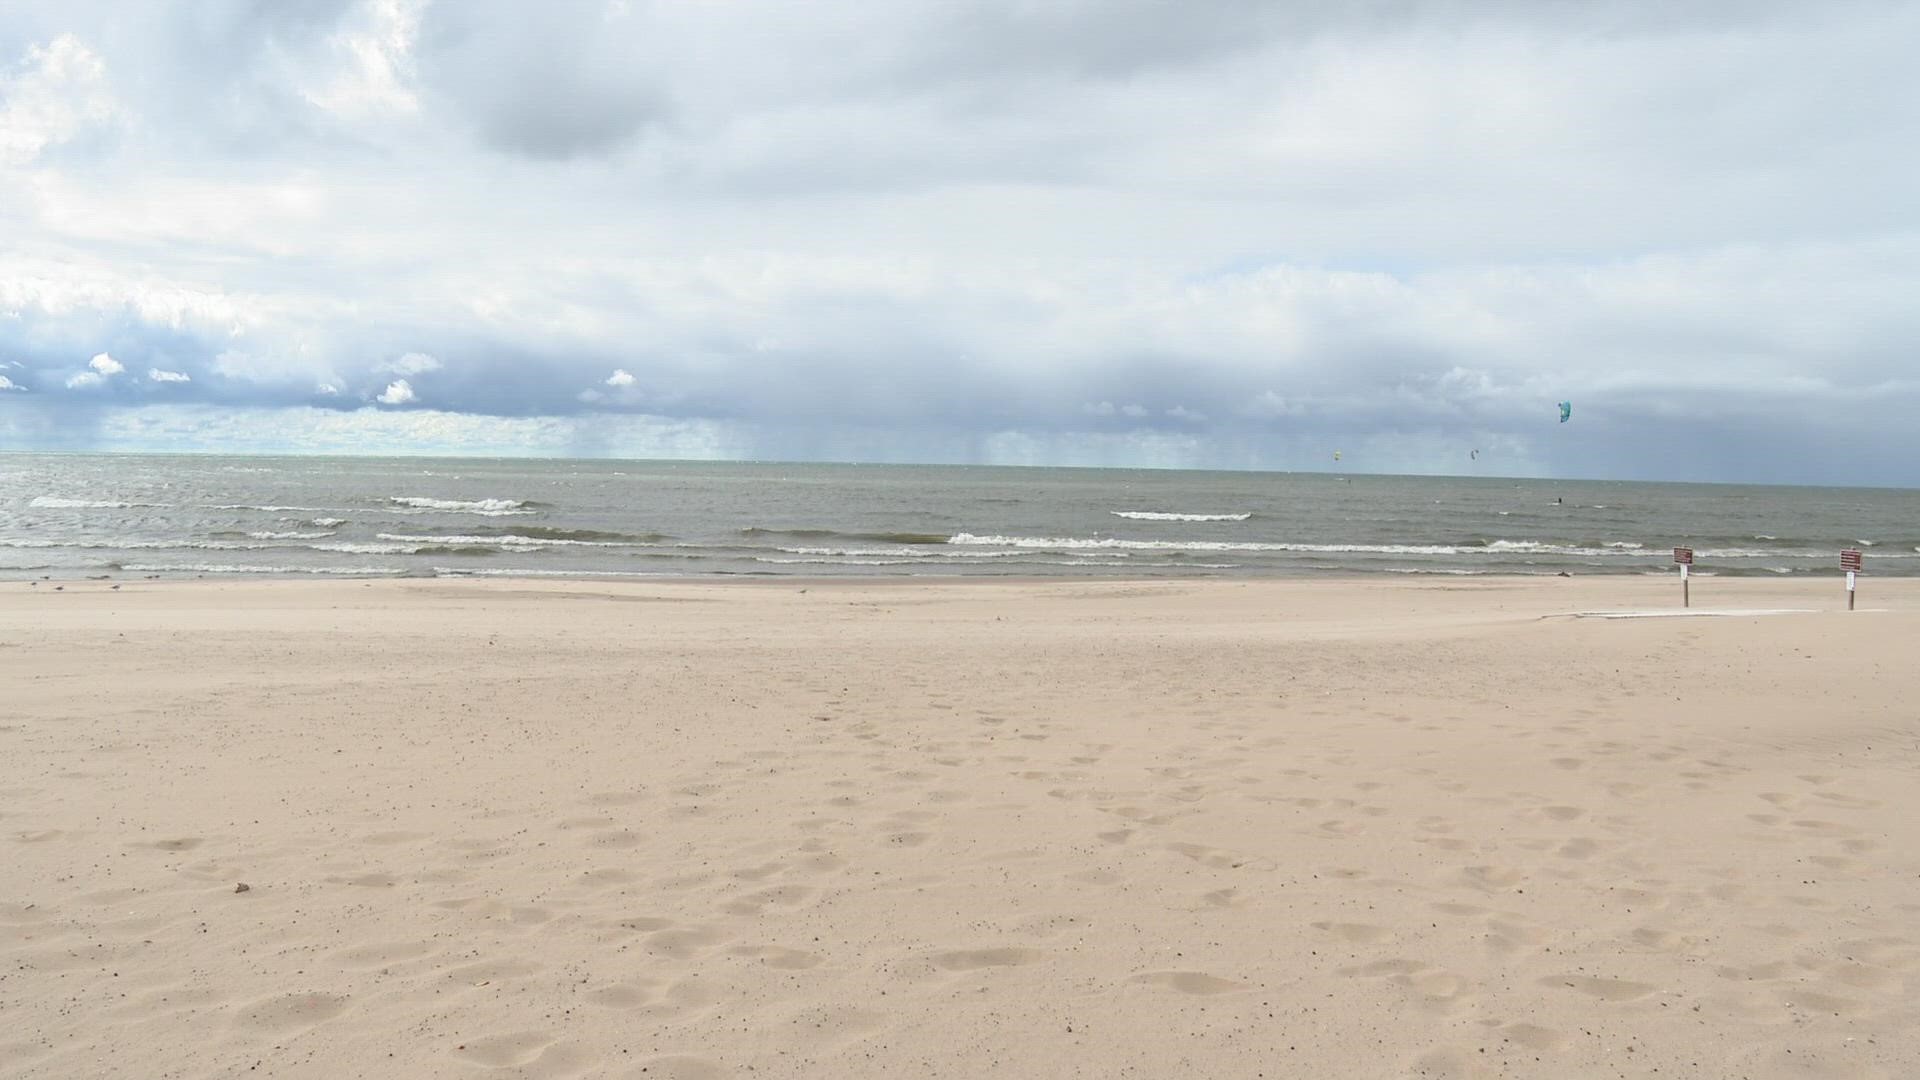 Check out the rolling waves in Grand Haven today!